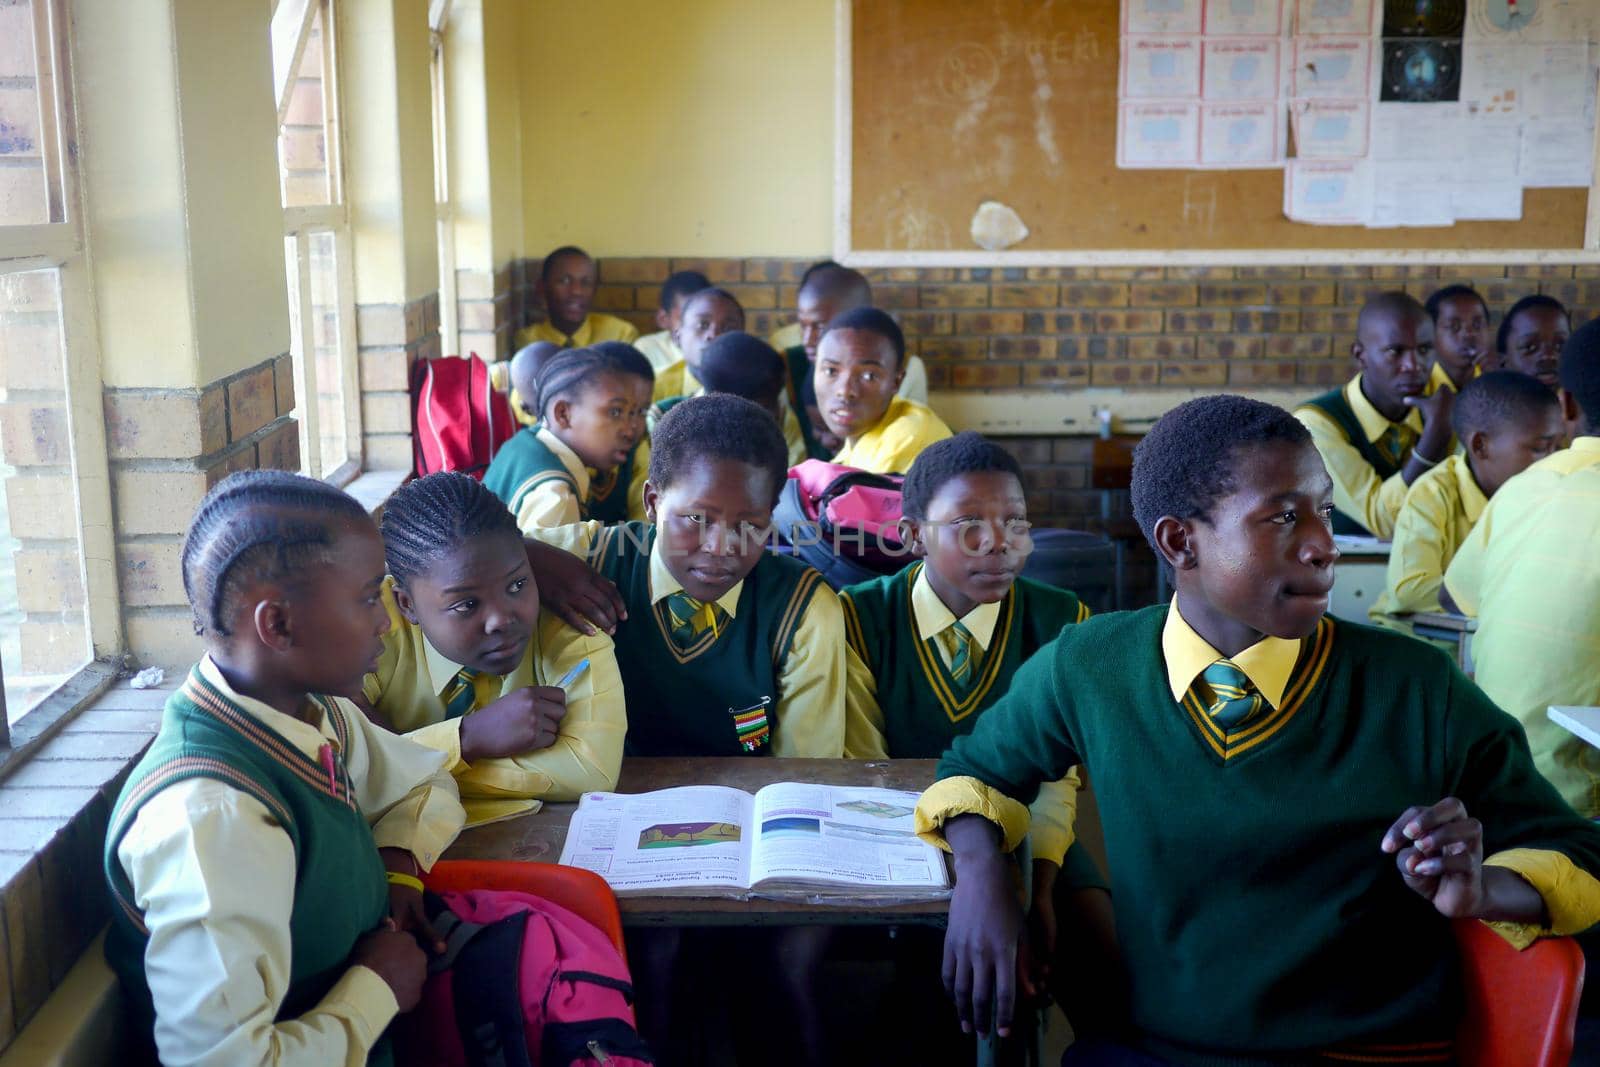 Children crammed into an overcrowded classroom in South Africa by fivepointsix